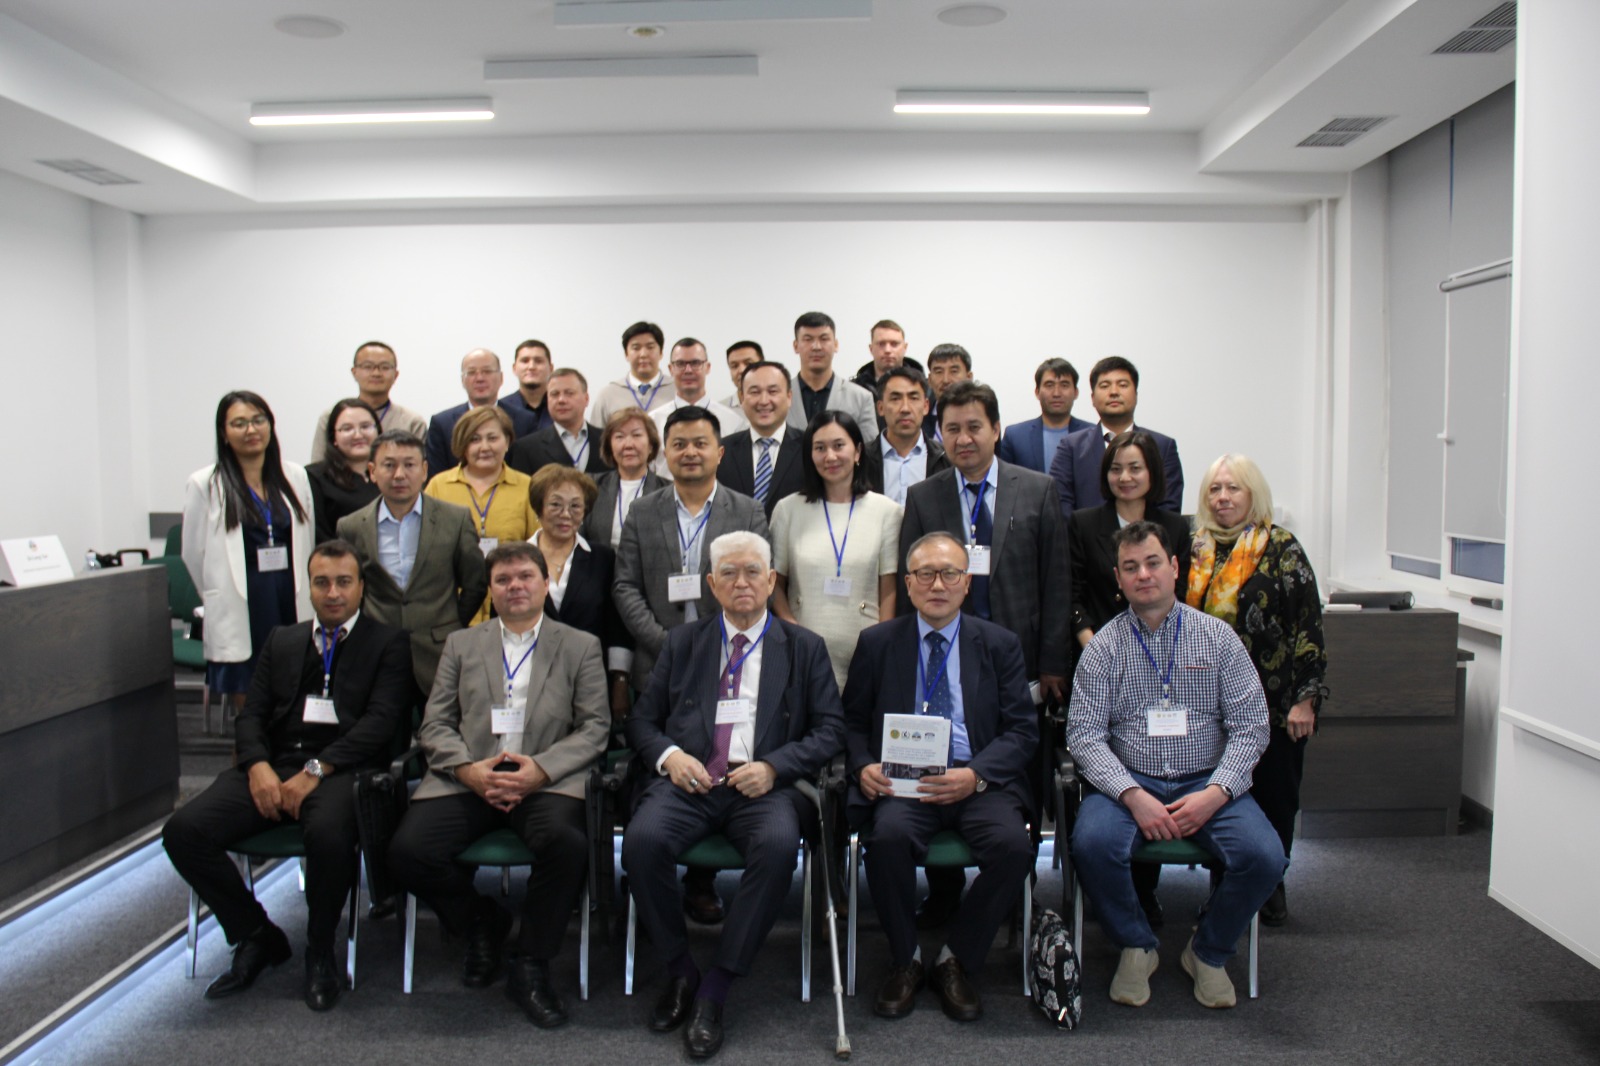 XIV International Symposium on the topic "Combustion and plasma chemistry. Physics and chemistry of carbon and nanoenergy materials" within the framework of SDGs 9, 12, 13 and 15